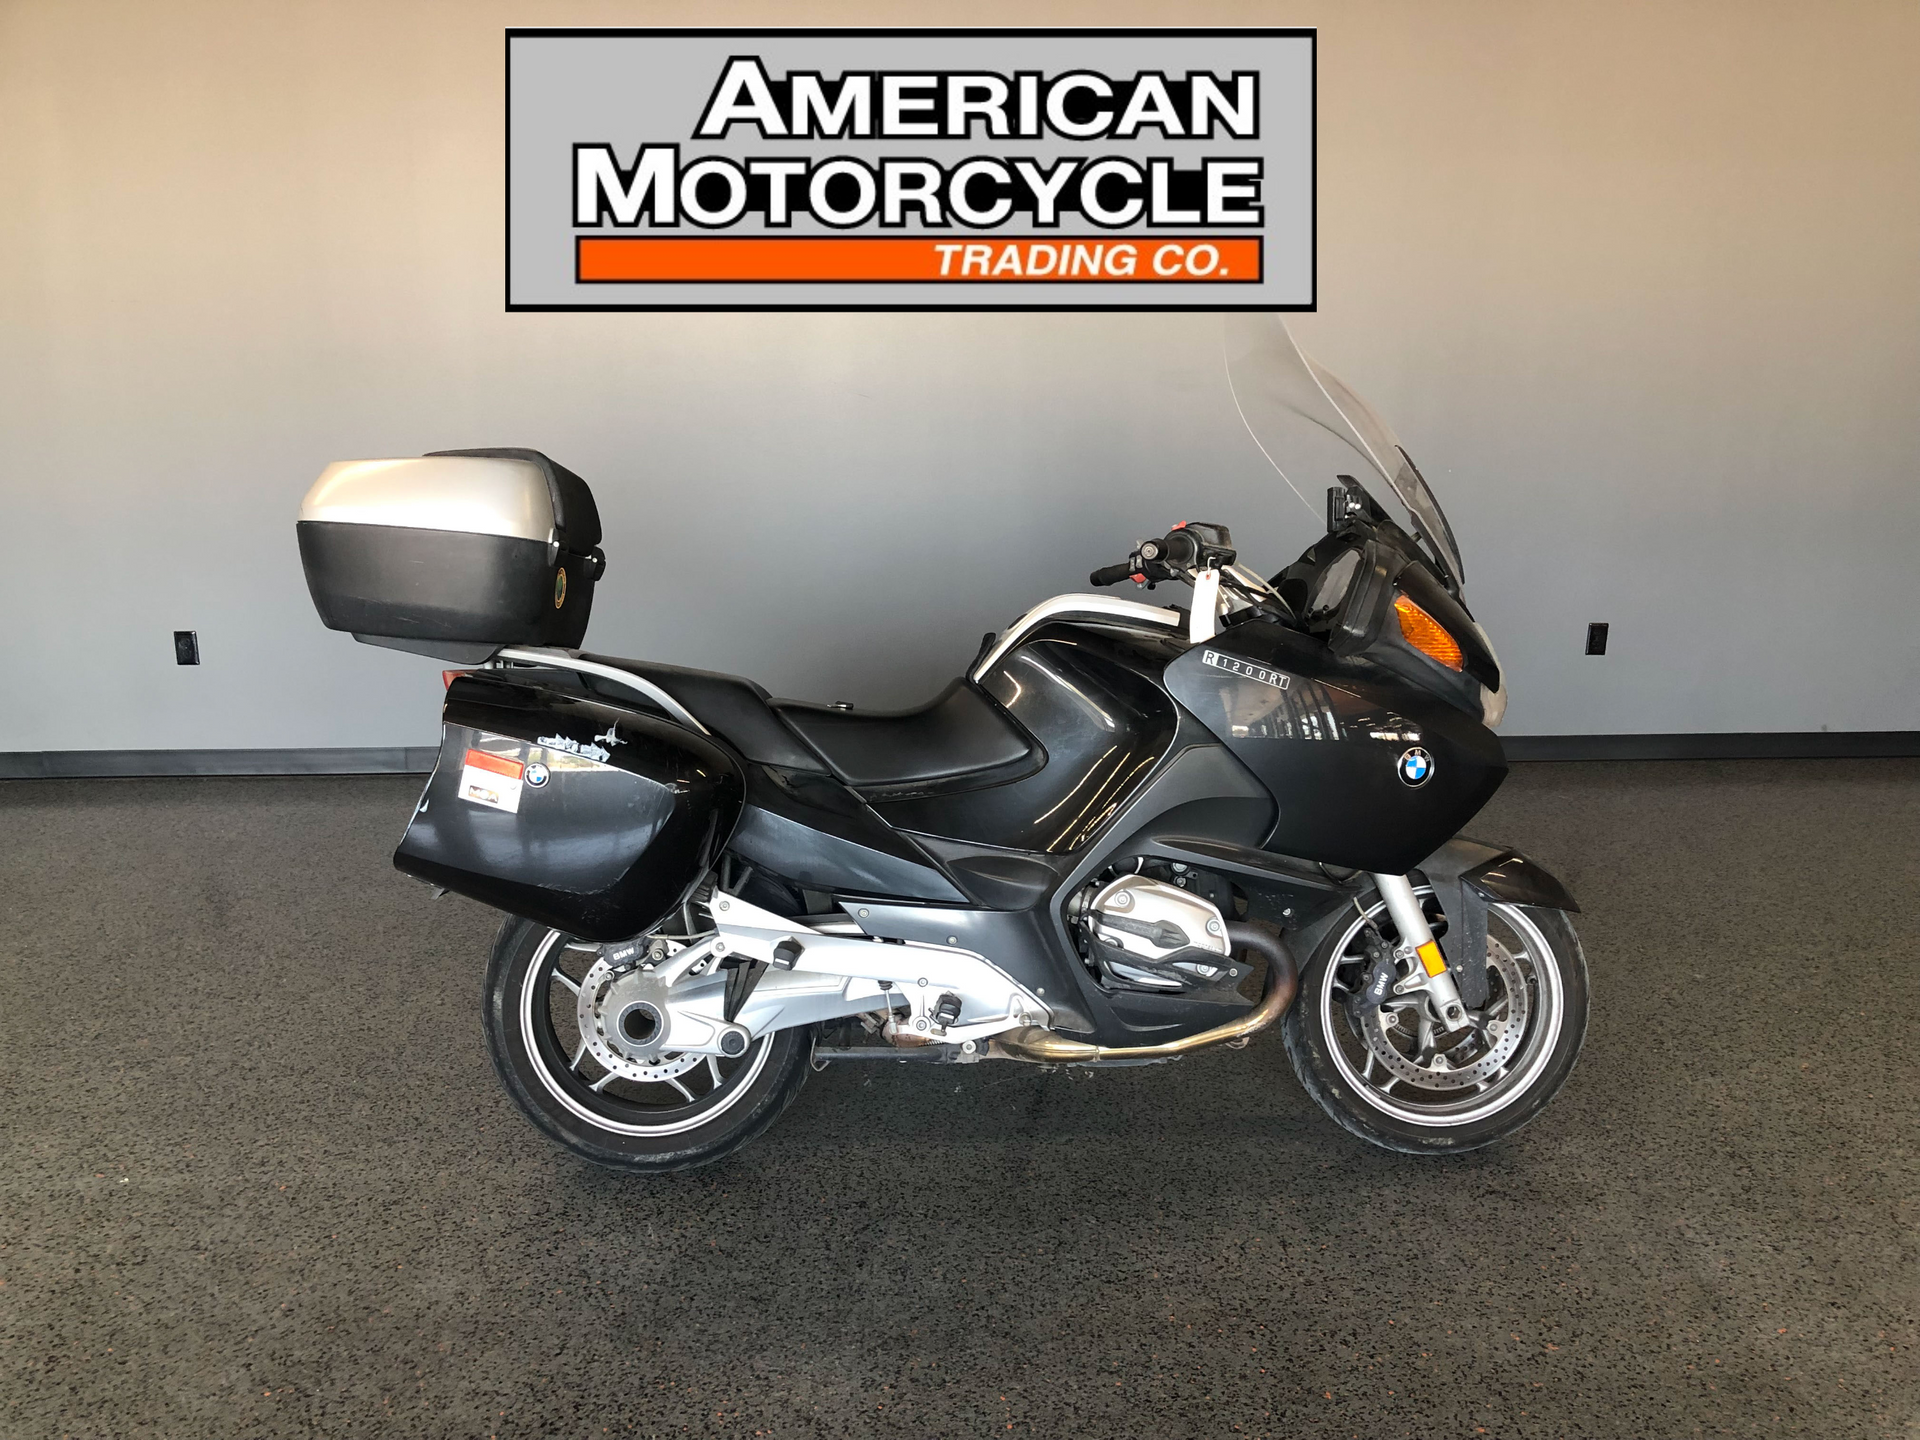 2006 BMW R1200RT | American Motorcycle Trading Company - Used Harley  Davidson Motorcycles